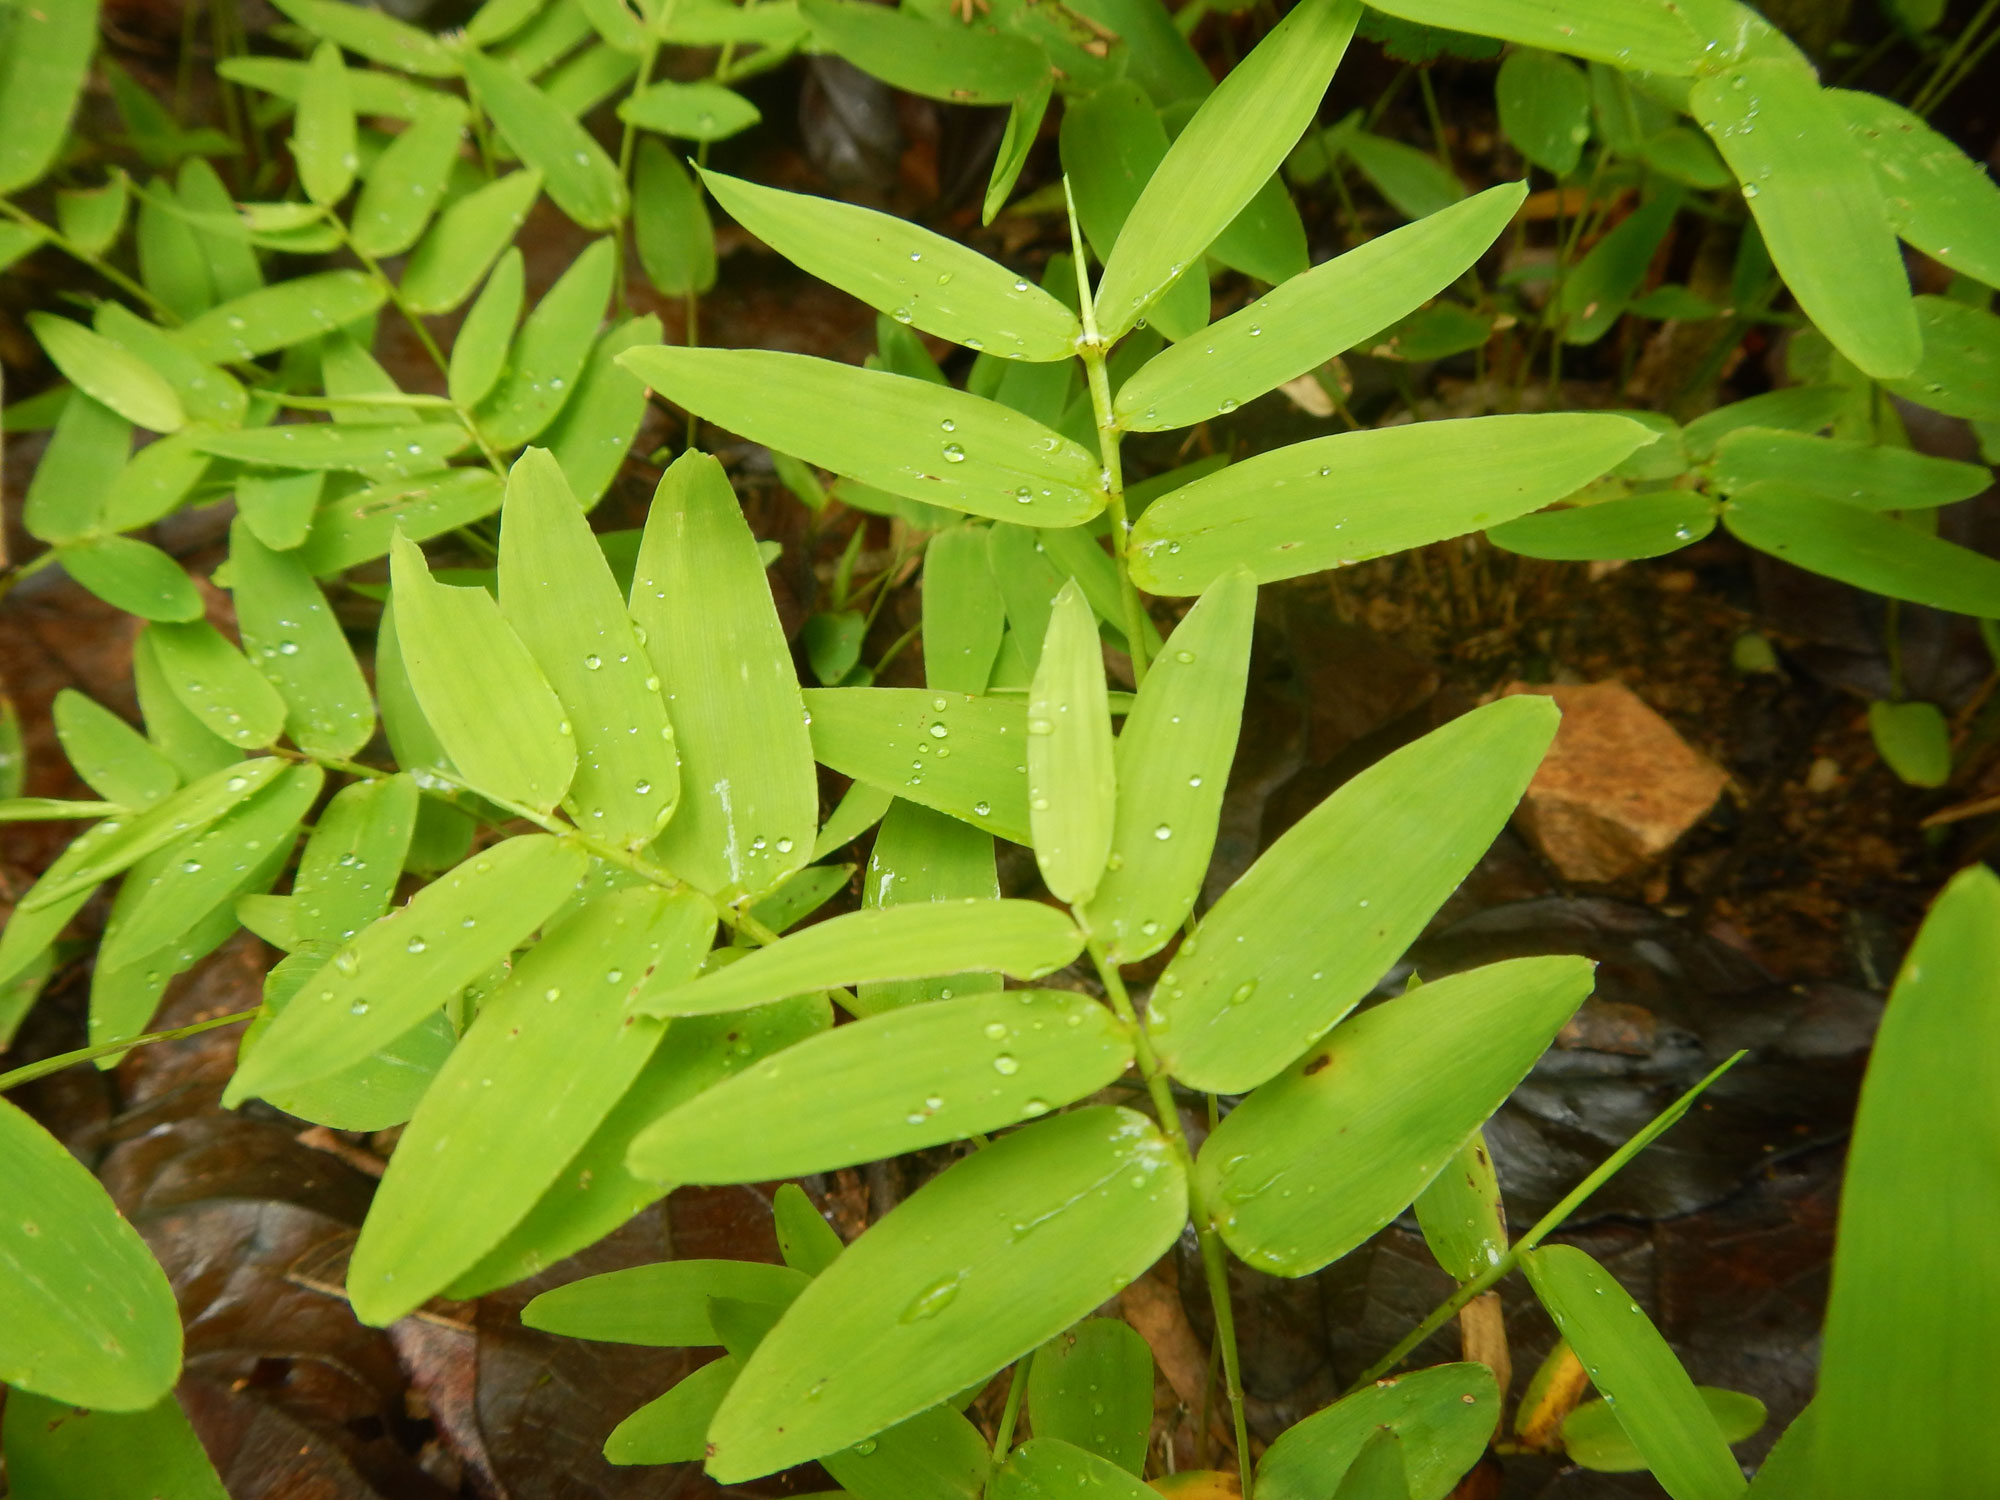 Photograph of a herbaceous bamboo in Brazil. The photo shows small bamboo plants growing near the ground, each with a delicate green stem bearing alternately arranged ovate leaves with rounded tips.